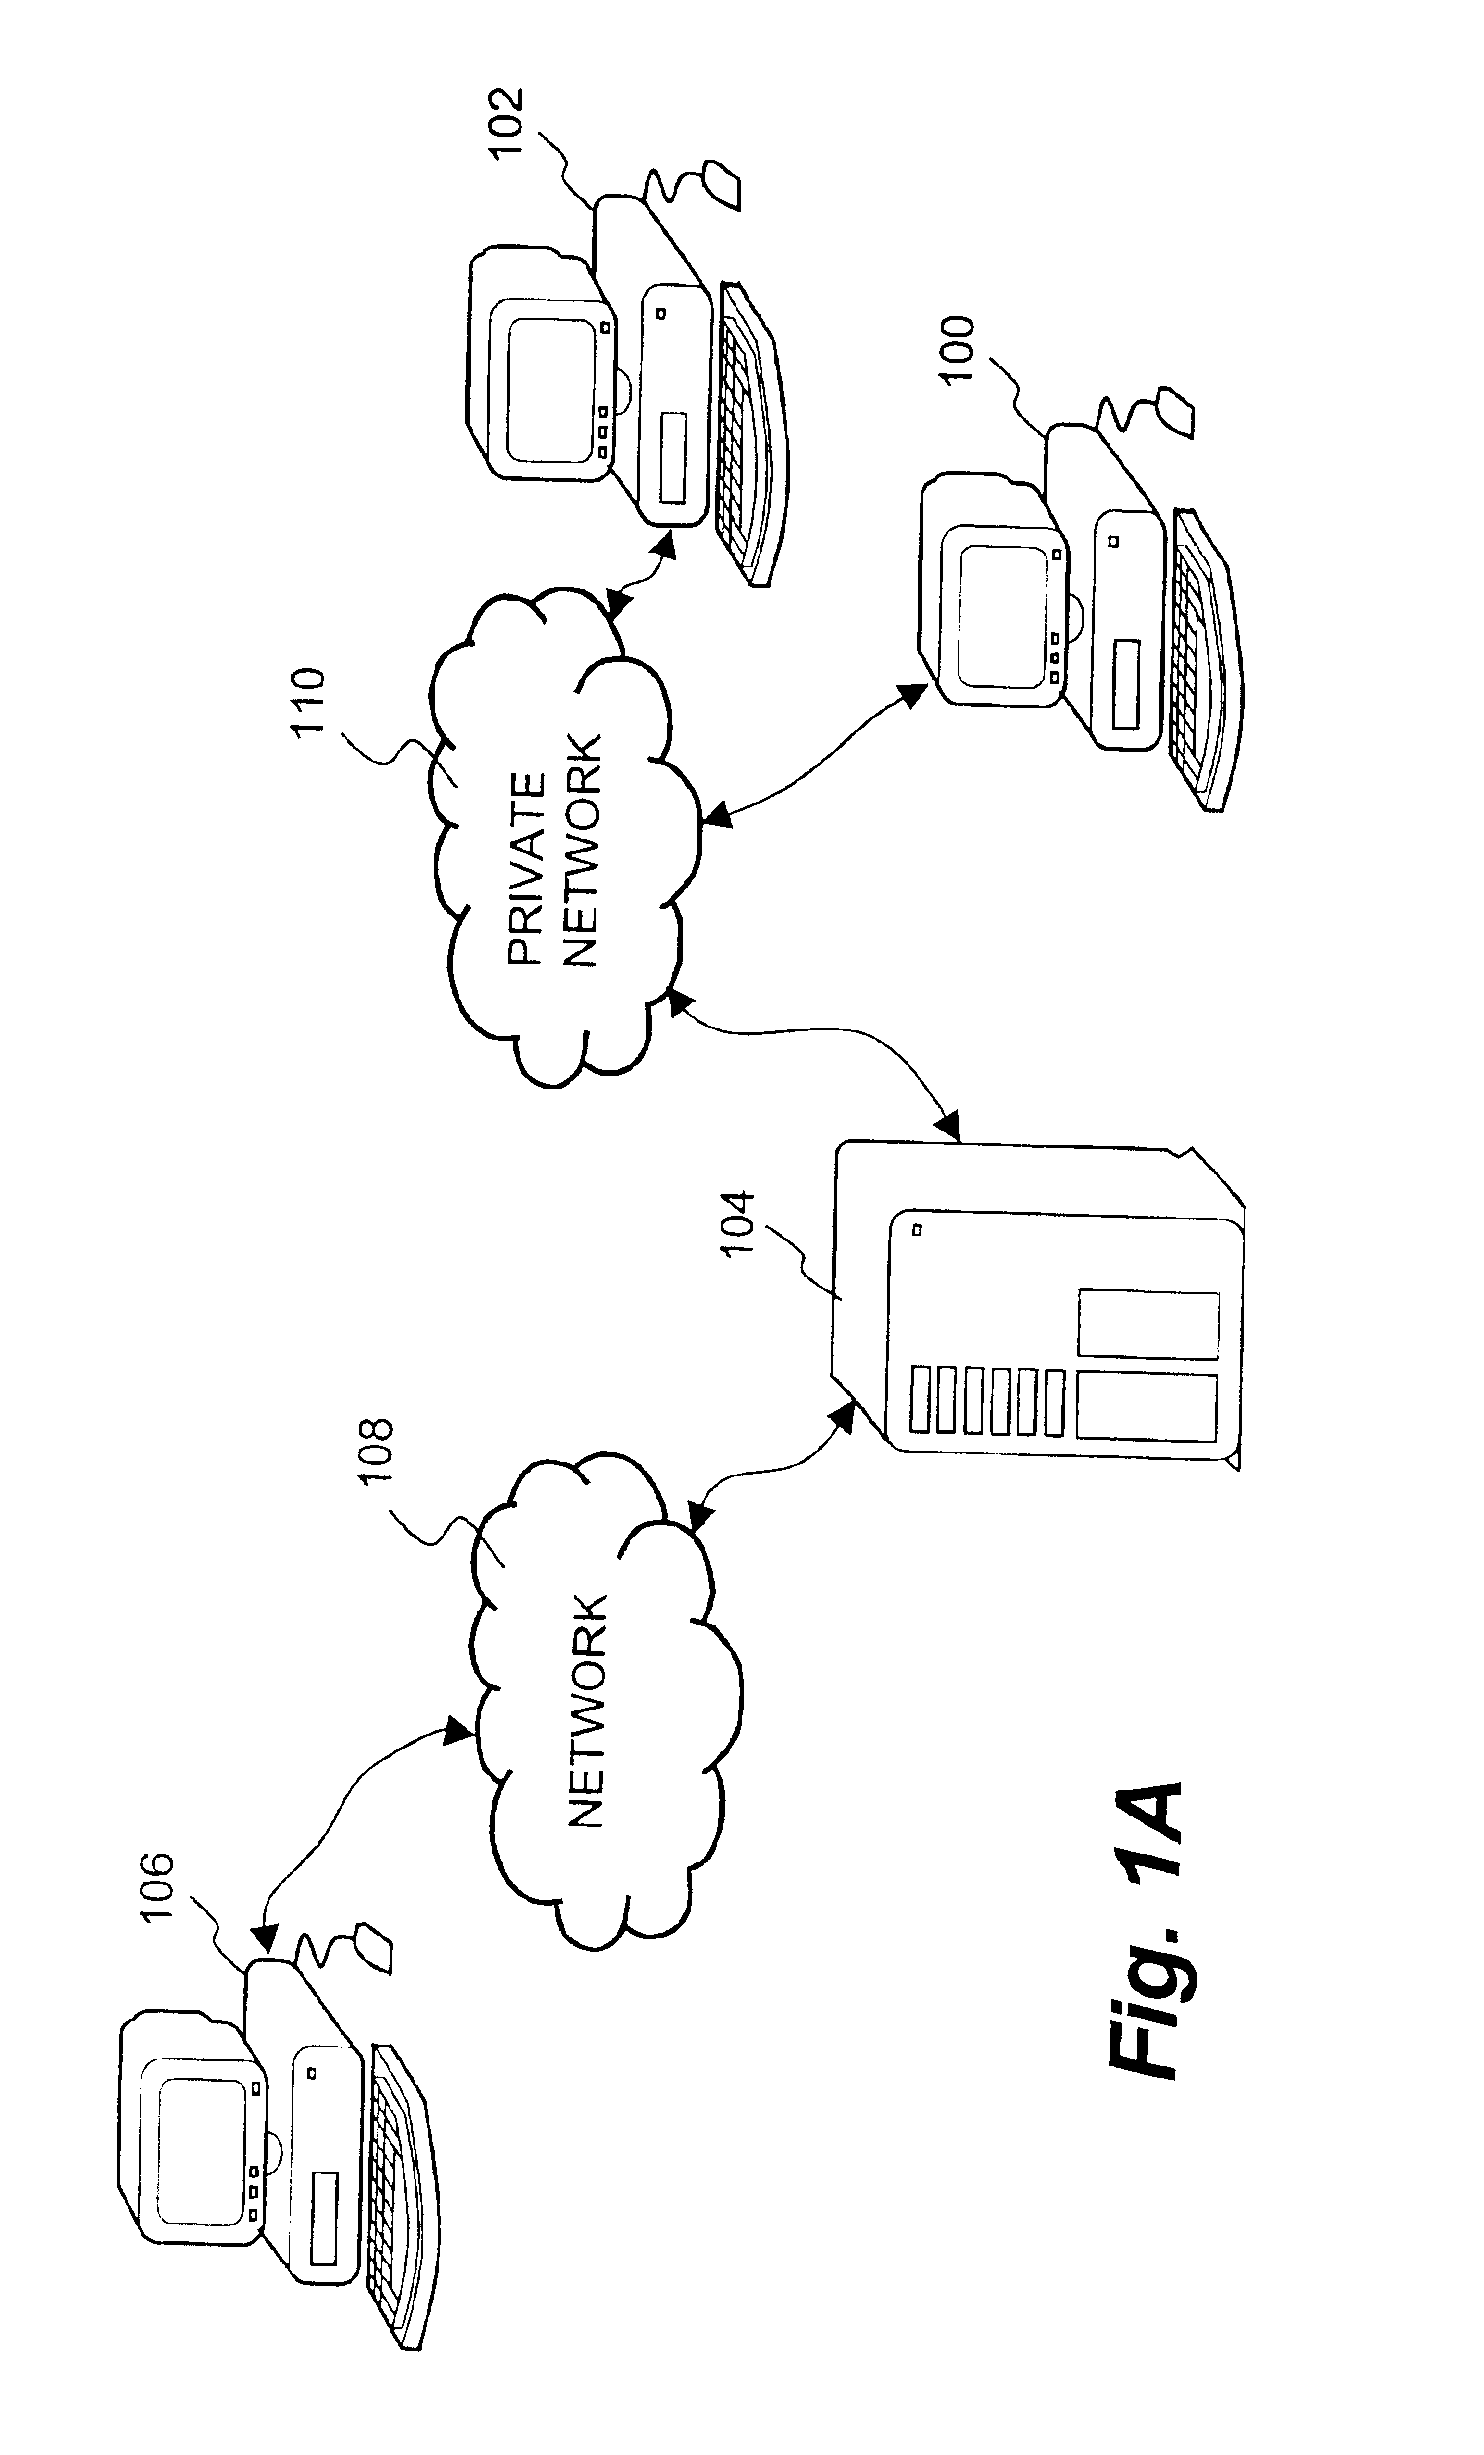 Method and apparatus for generating structured documents for various presentations and the uses thereof